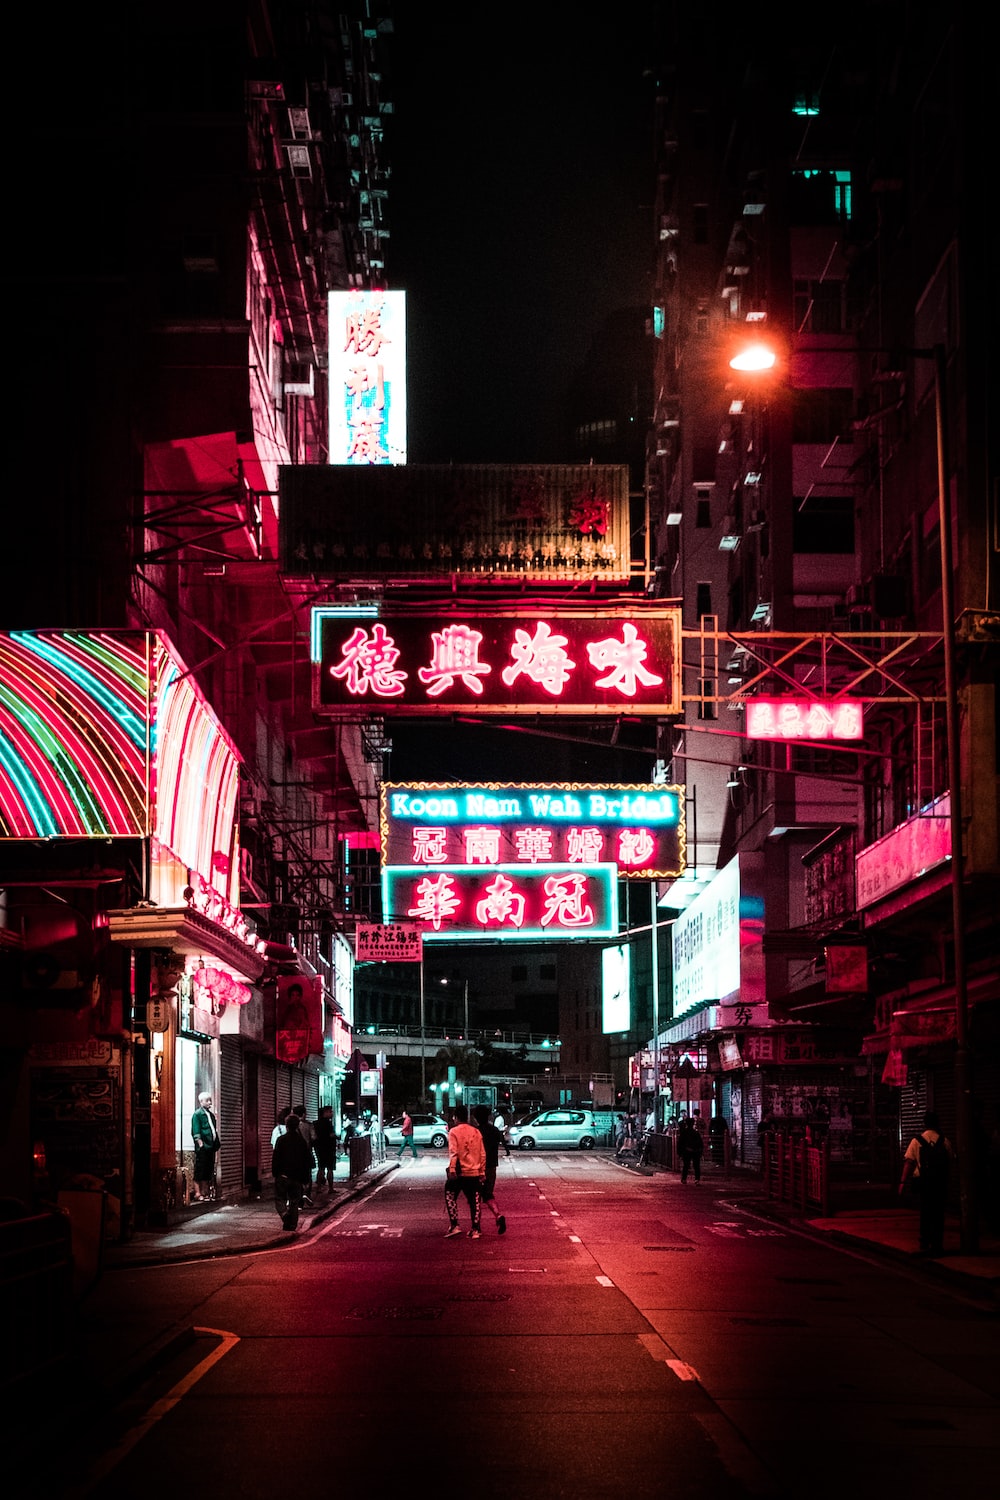 Hong Kong Neon Picture. Download Free Image